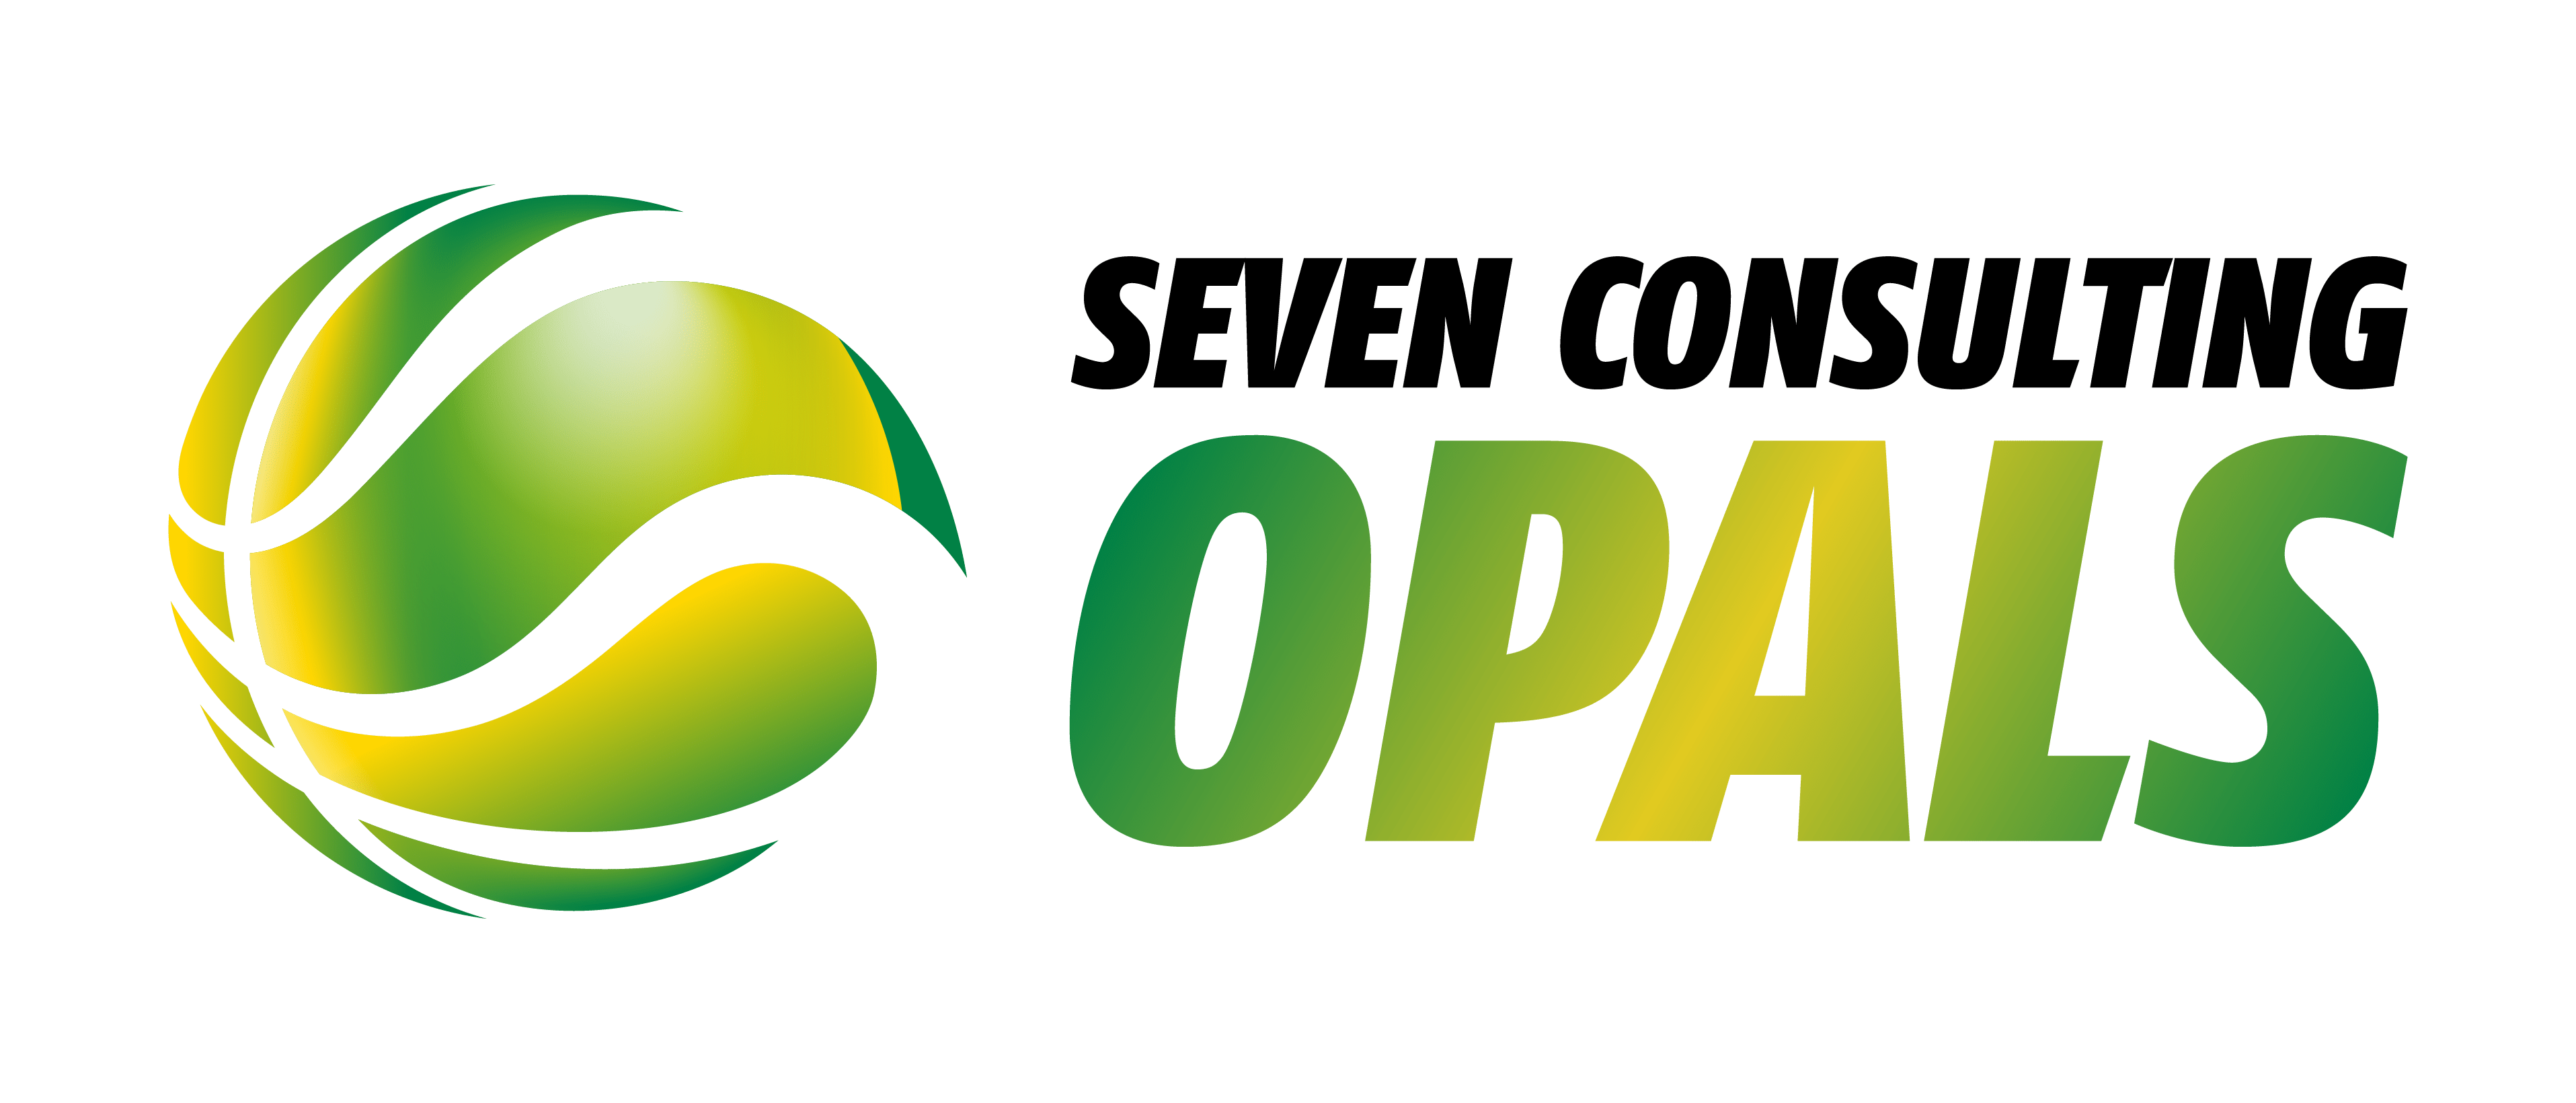 Seven Consulting Opals